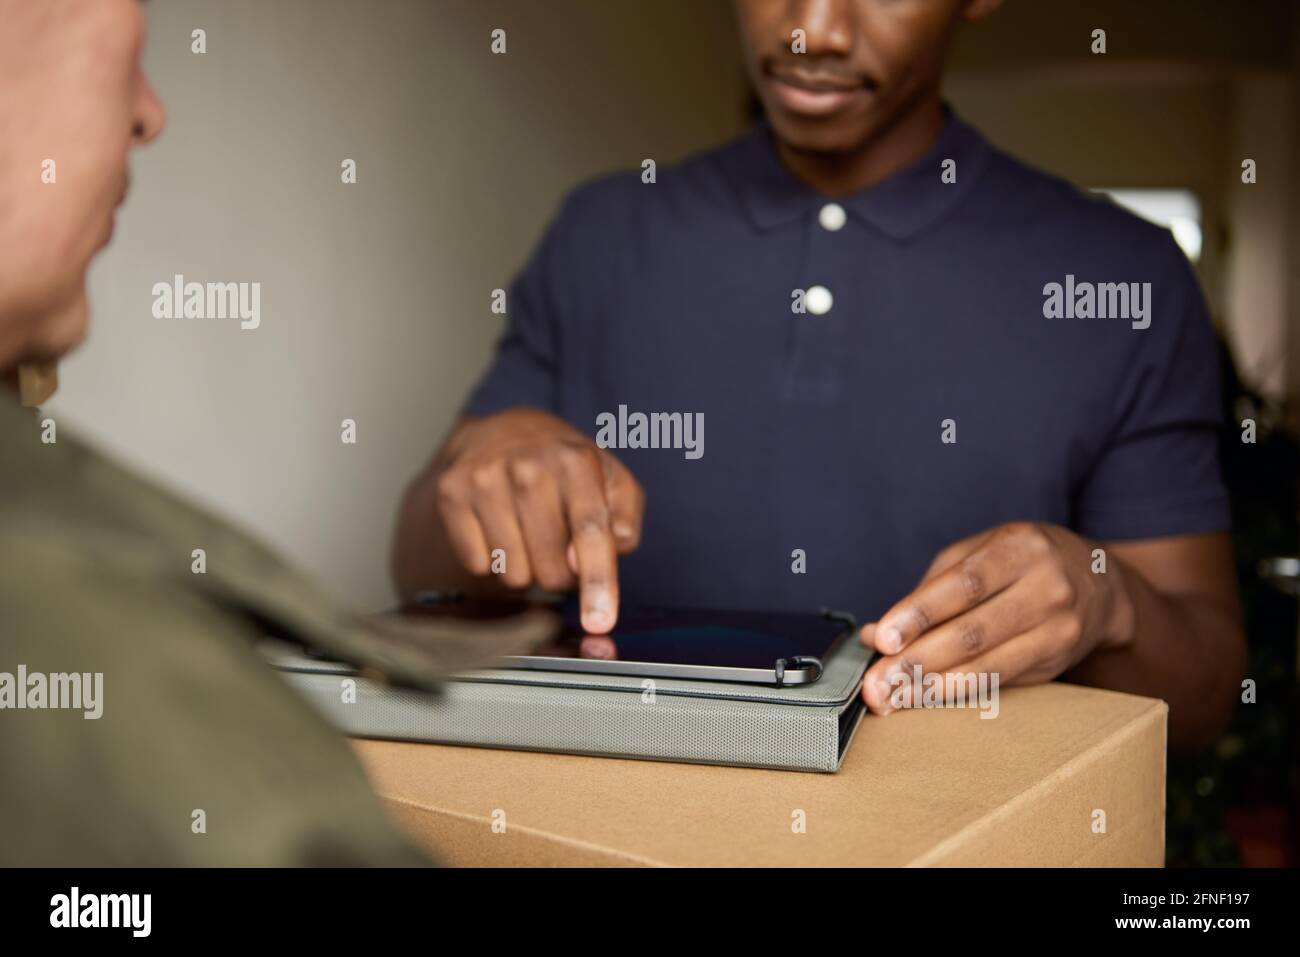 African man signing a digital tablet for a courier delivery Stock Photo